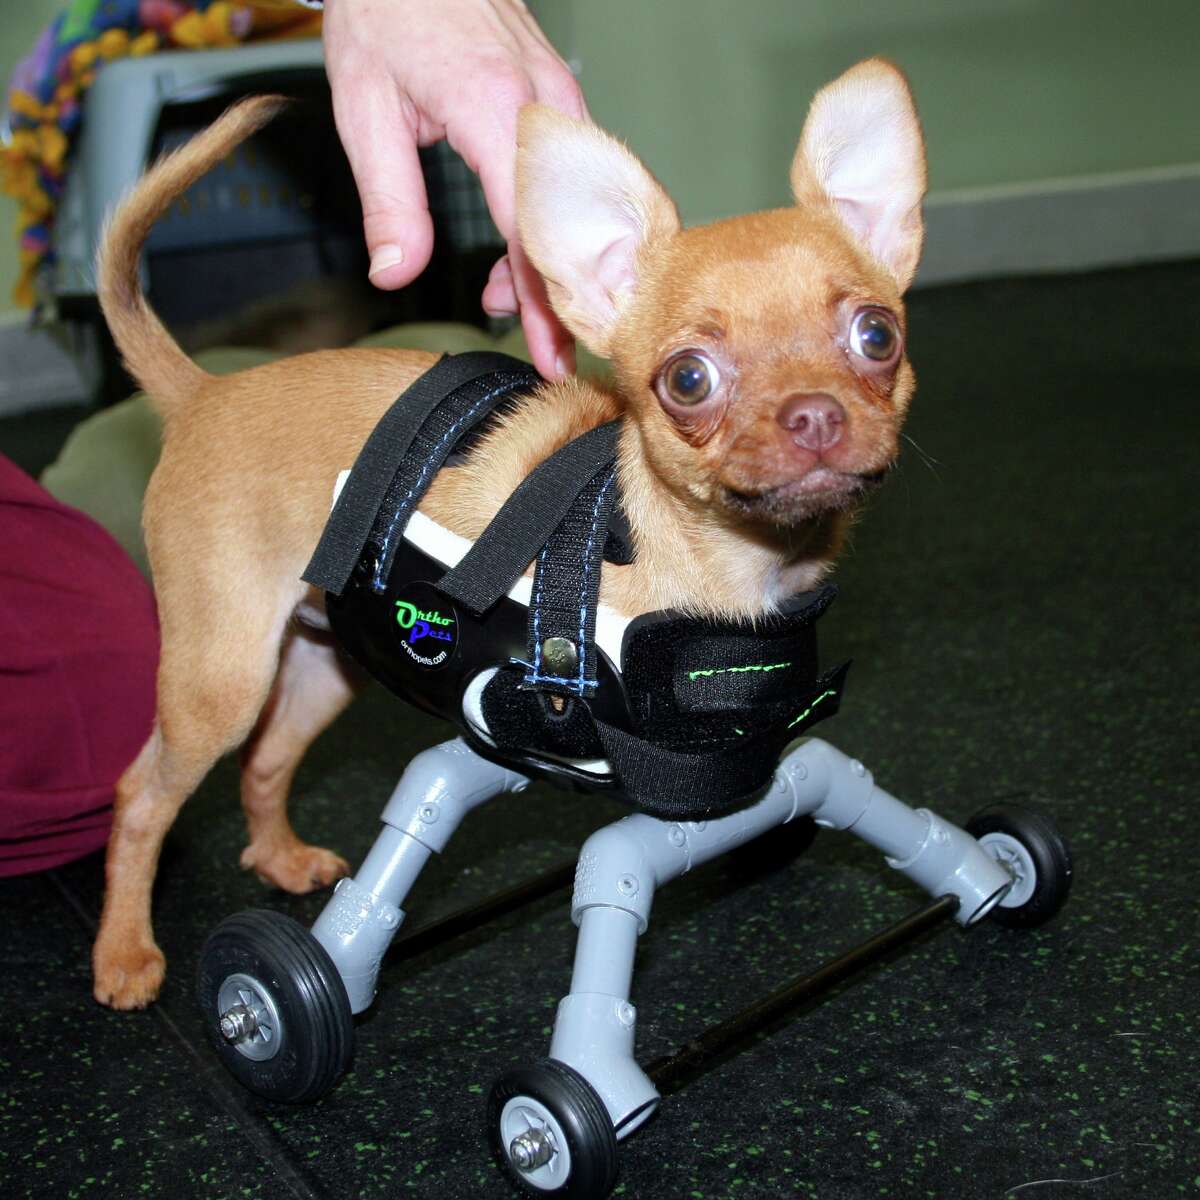 A chihuahua named Daffodil who is missing her front legs found new hope when the SF SPCA helped her get a set of prosthetic wheels.